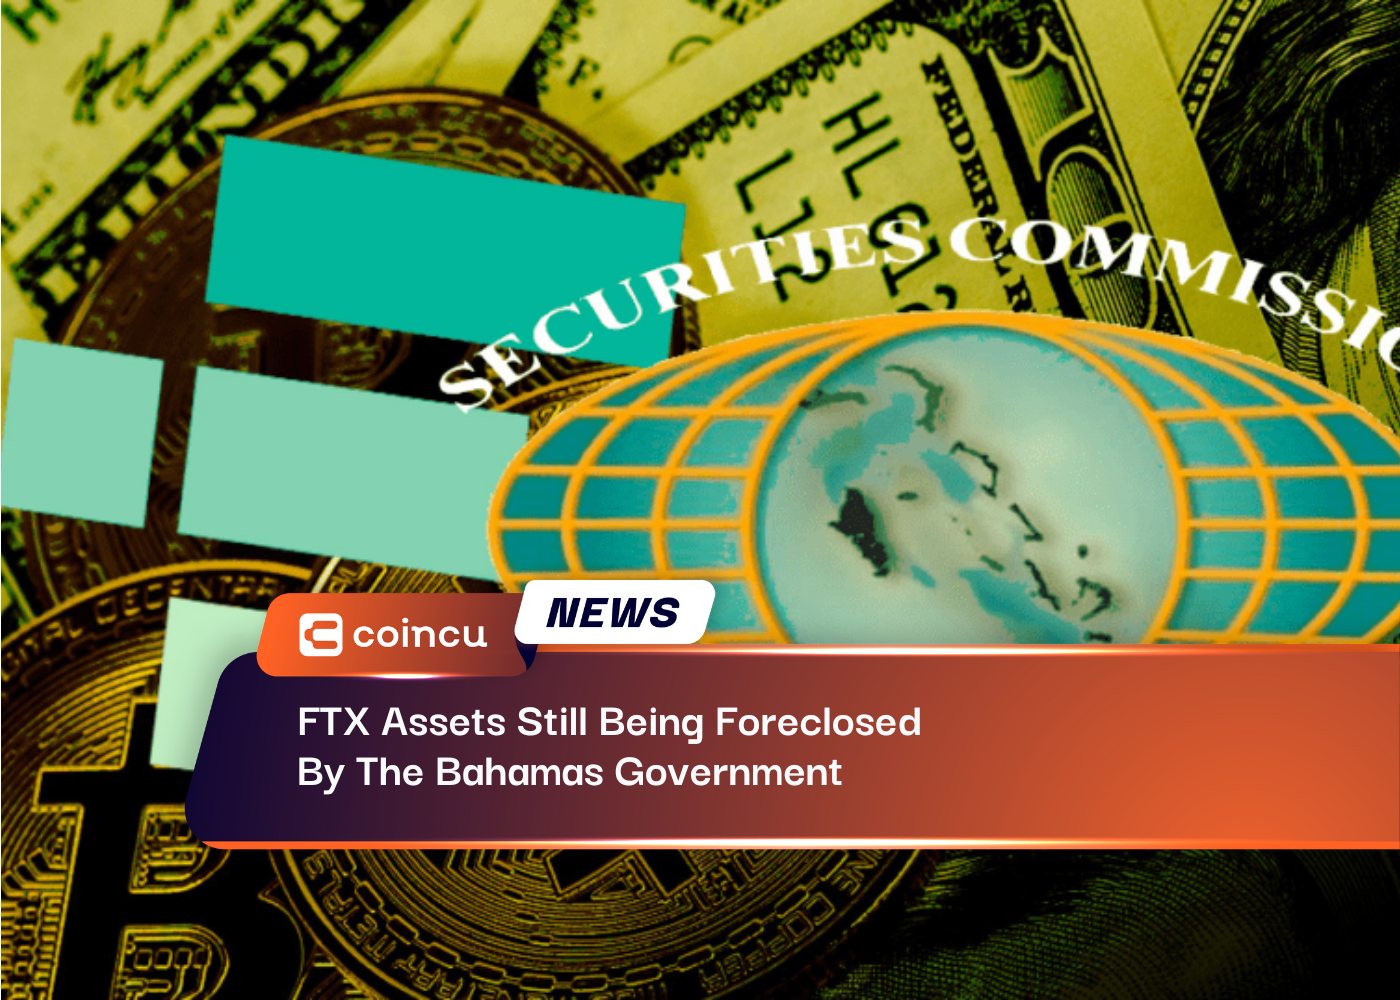 FTX Assets Still Being Foreclosed By The Bahamas Government